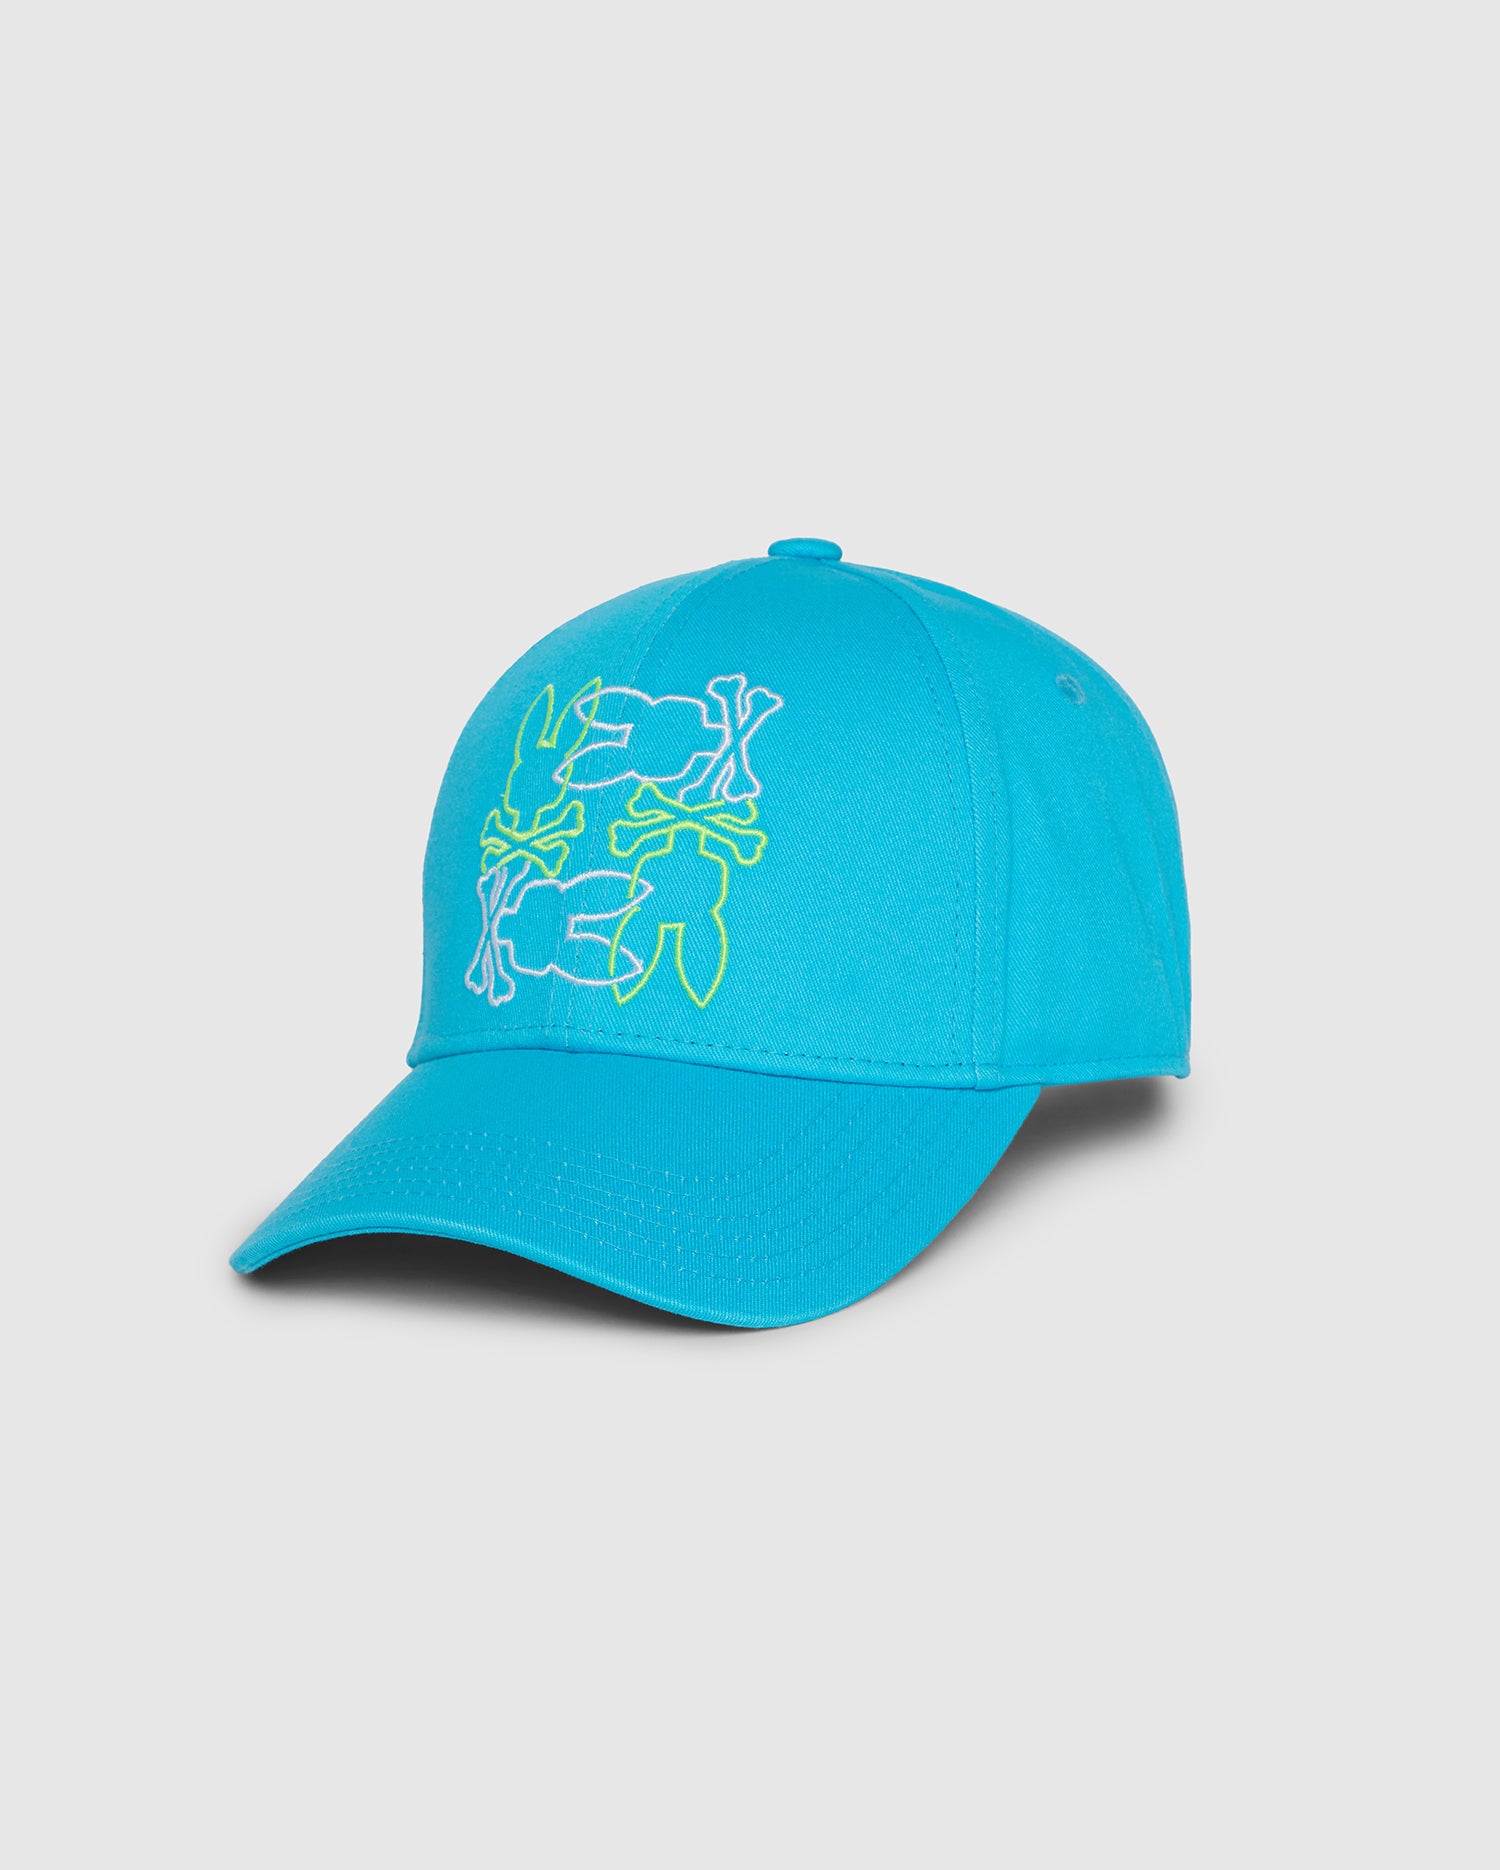 A vibrant blue baseball cap, the Psycho Bunny MENS RODMAN BASEBALL CAP - B6A124B2HT, this chic wardrobe accessory features an embroidered design of abstract, overlapping figures in green and white on the front. The headgear includes a curved brim and an adjustable back for a perfect fit.